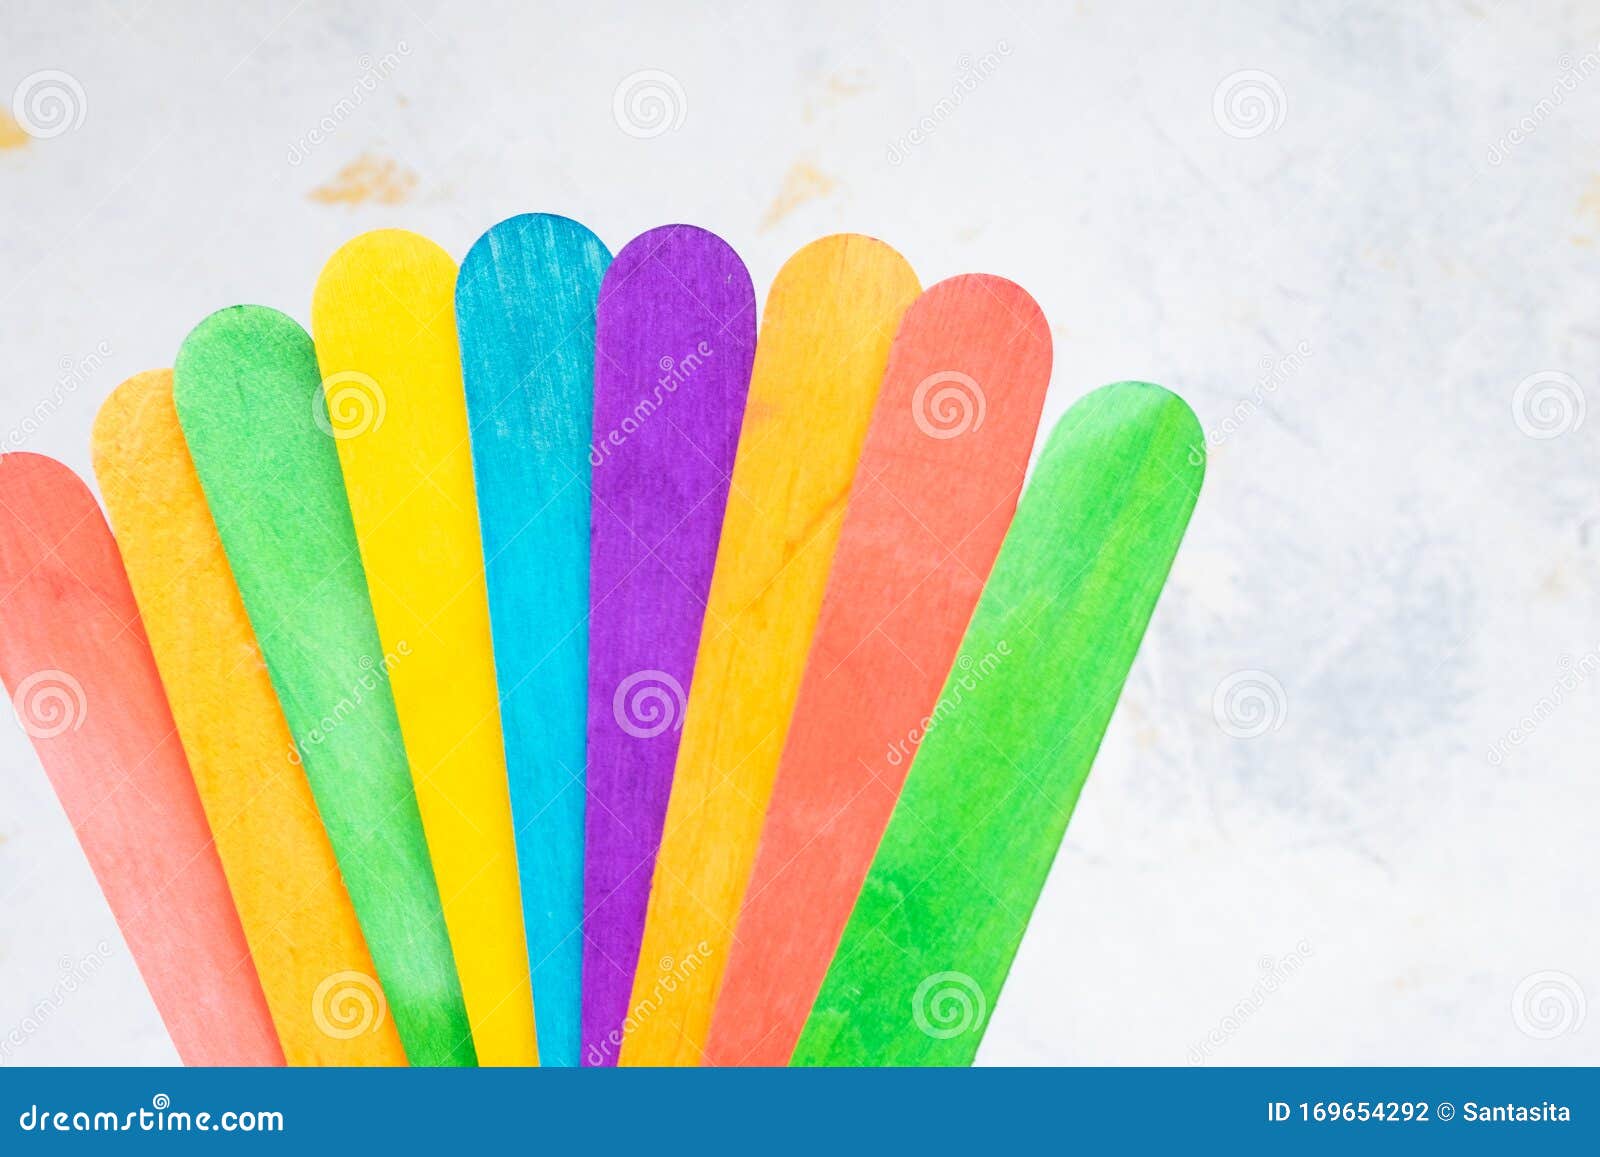 Bunch of Colorful Popsicle Sticks for Arts and Crafts Stock Photo